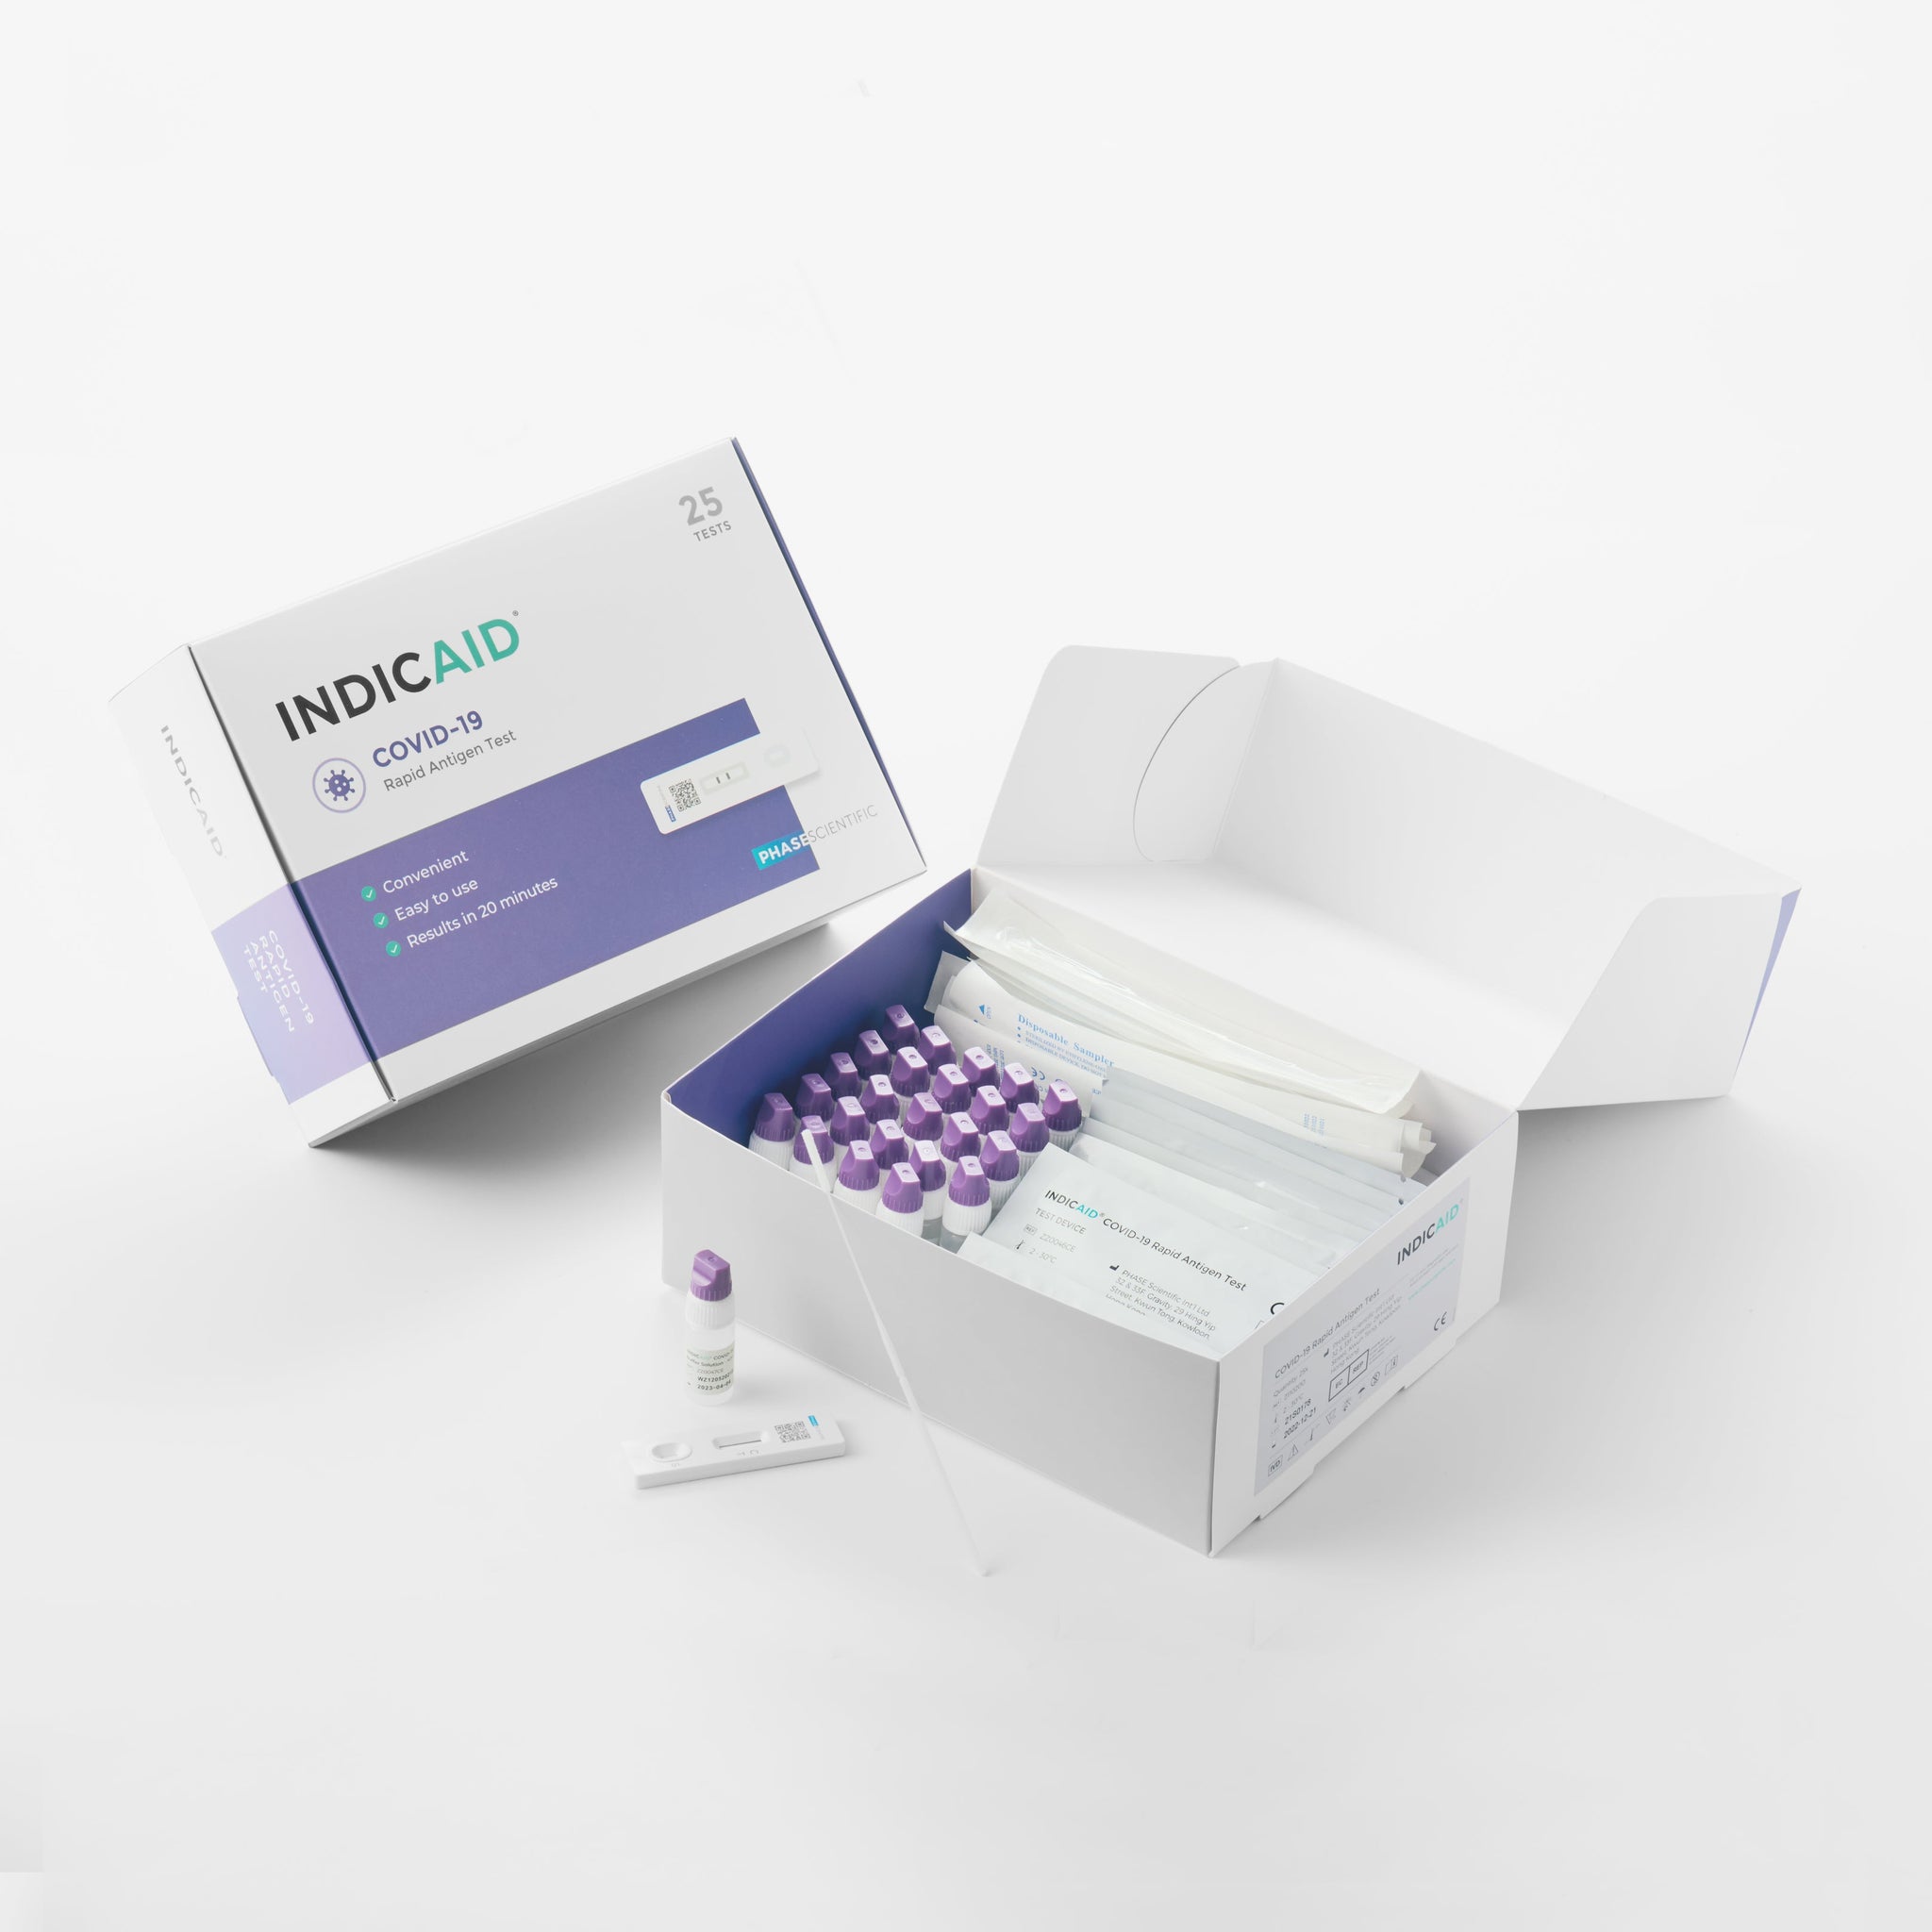 INDICAID Rapid Antigen Test HK (25-kit product content) is a HK government designated brand and provides results in 20 minutes